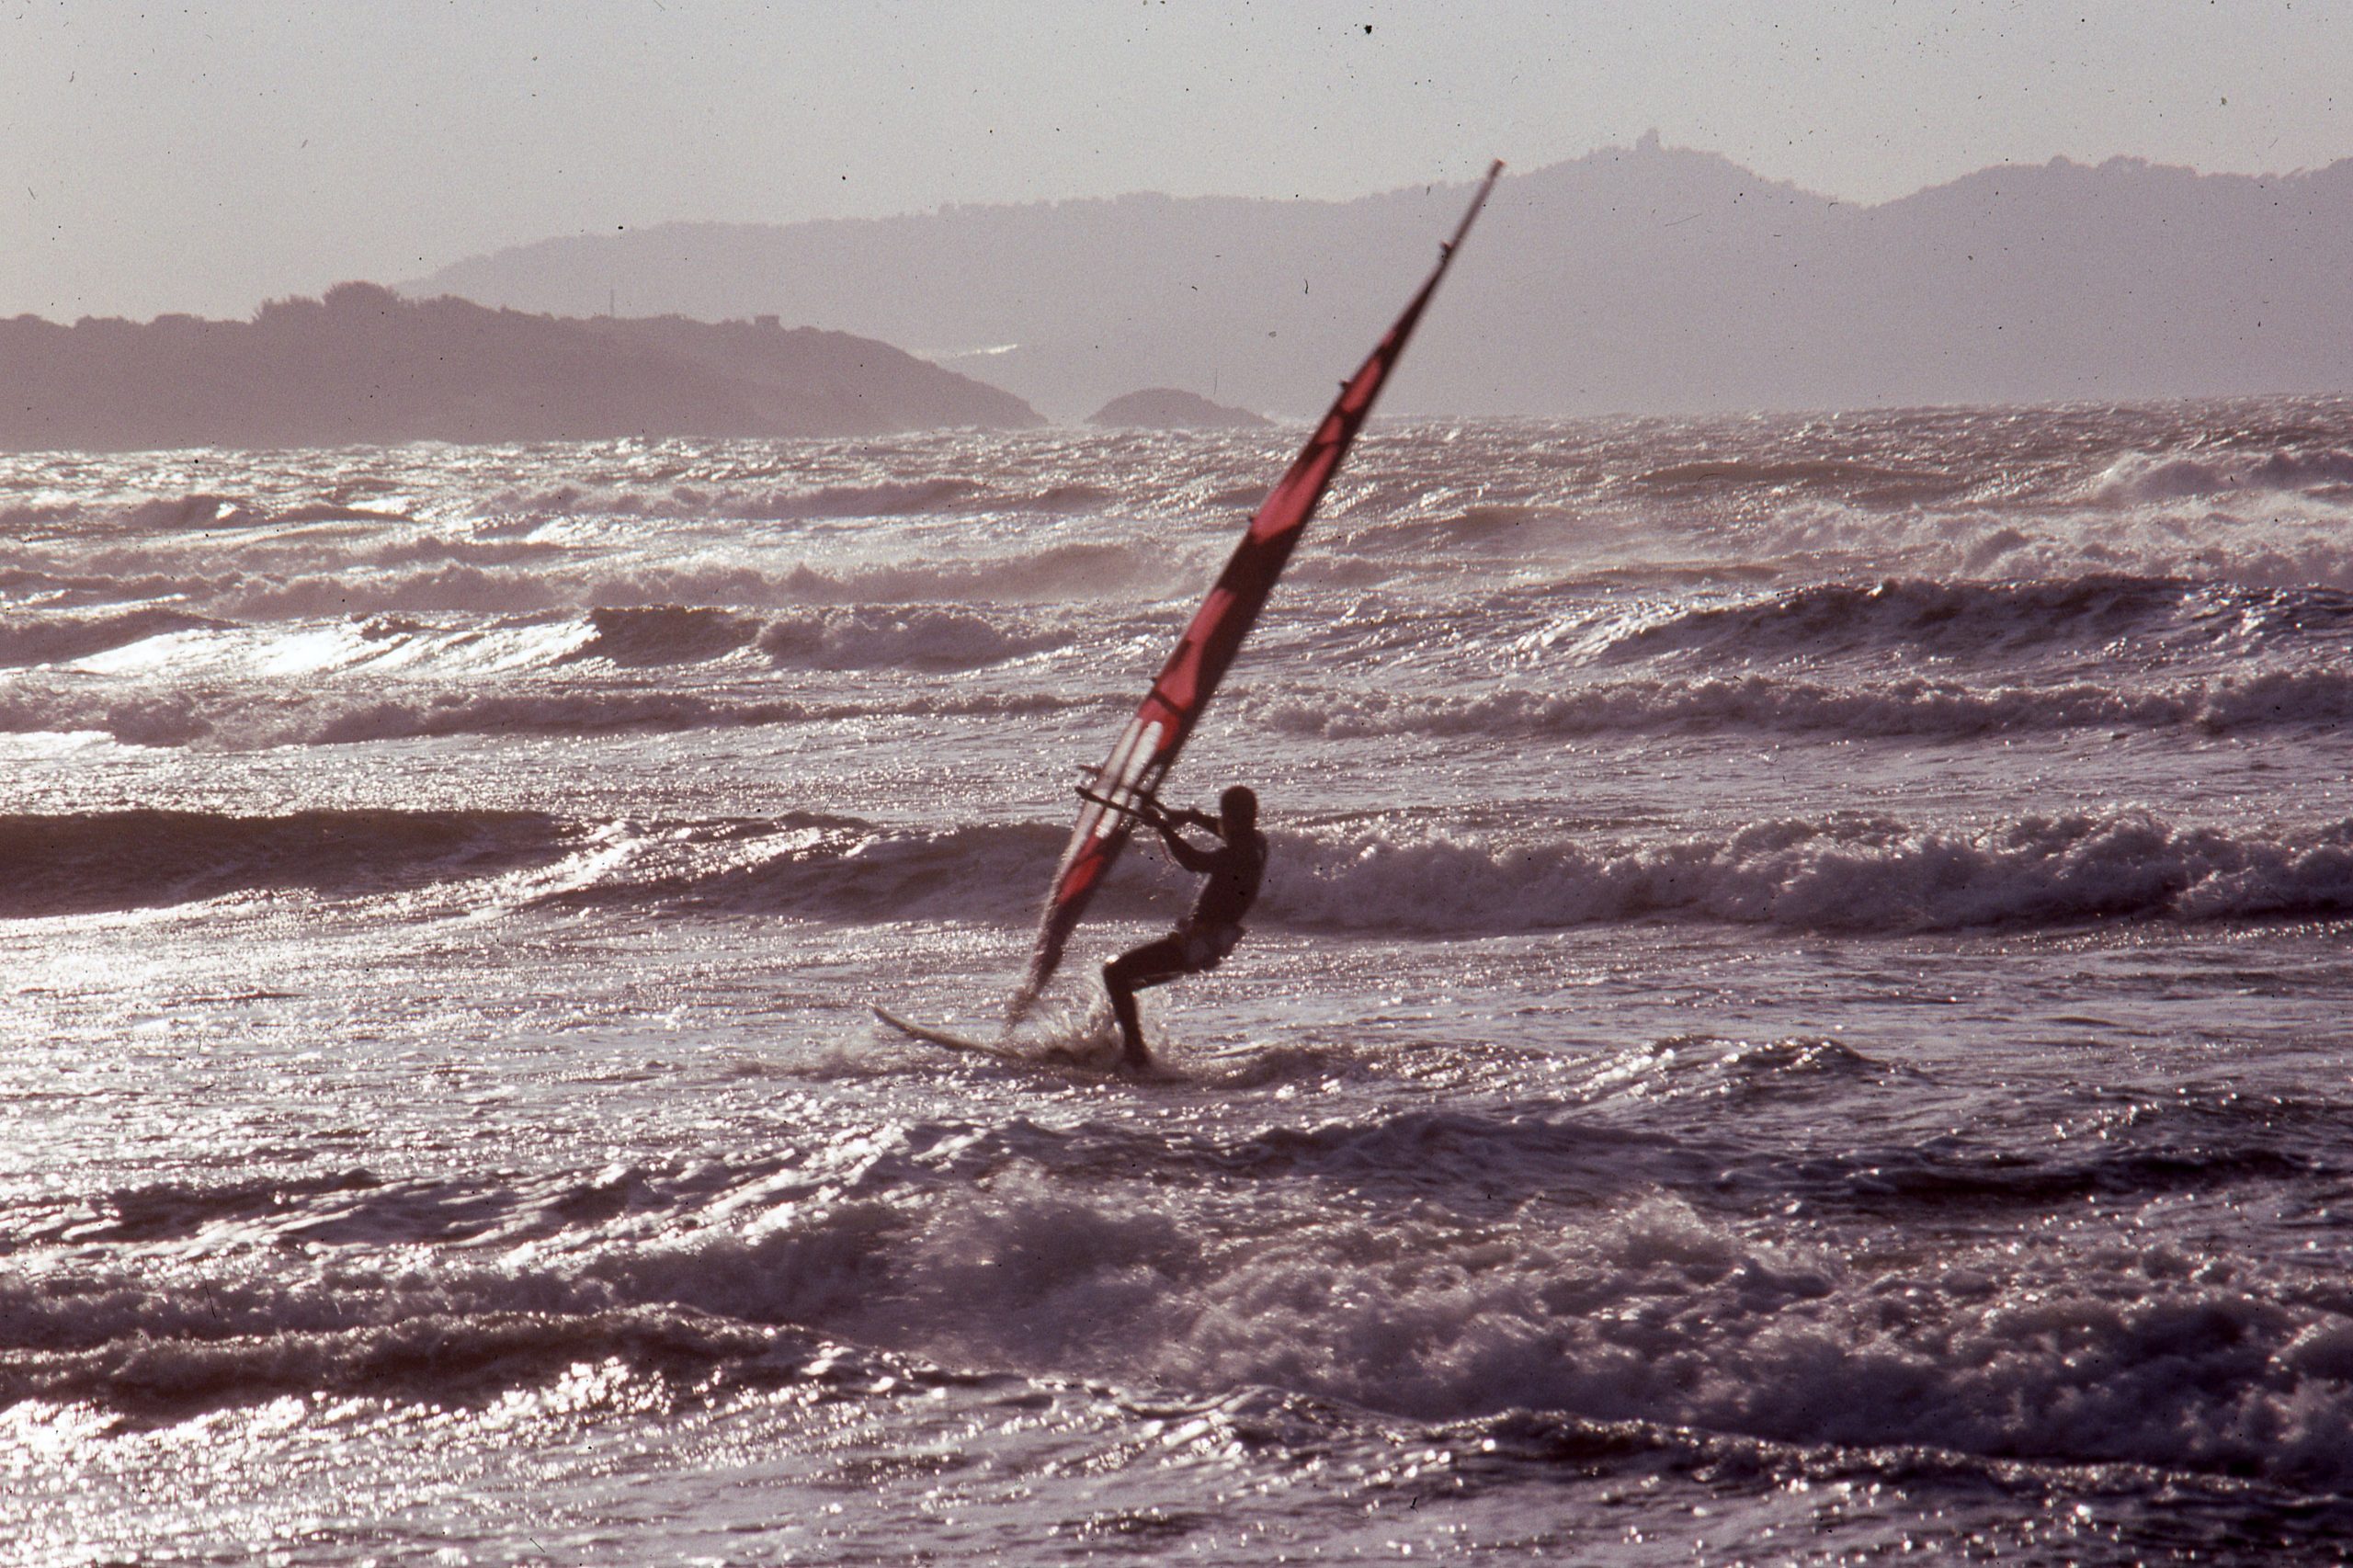 Windsurfing during cold weather in South France